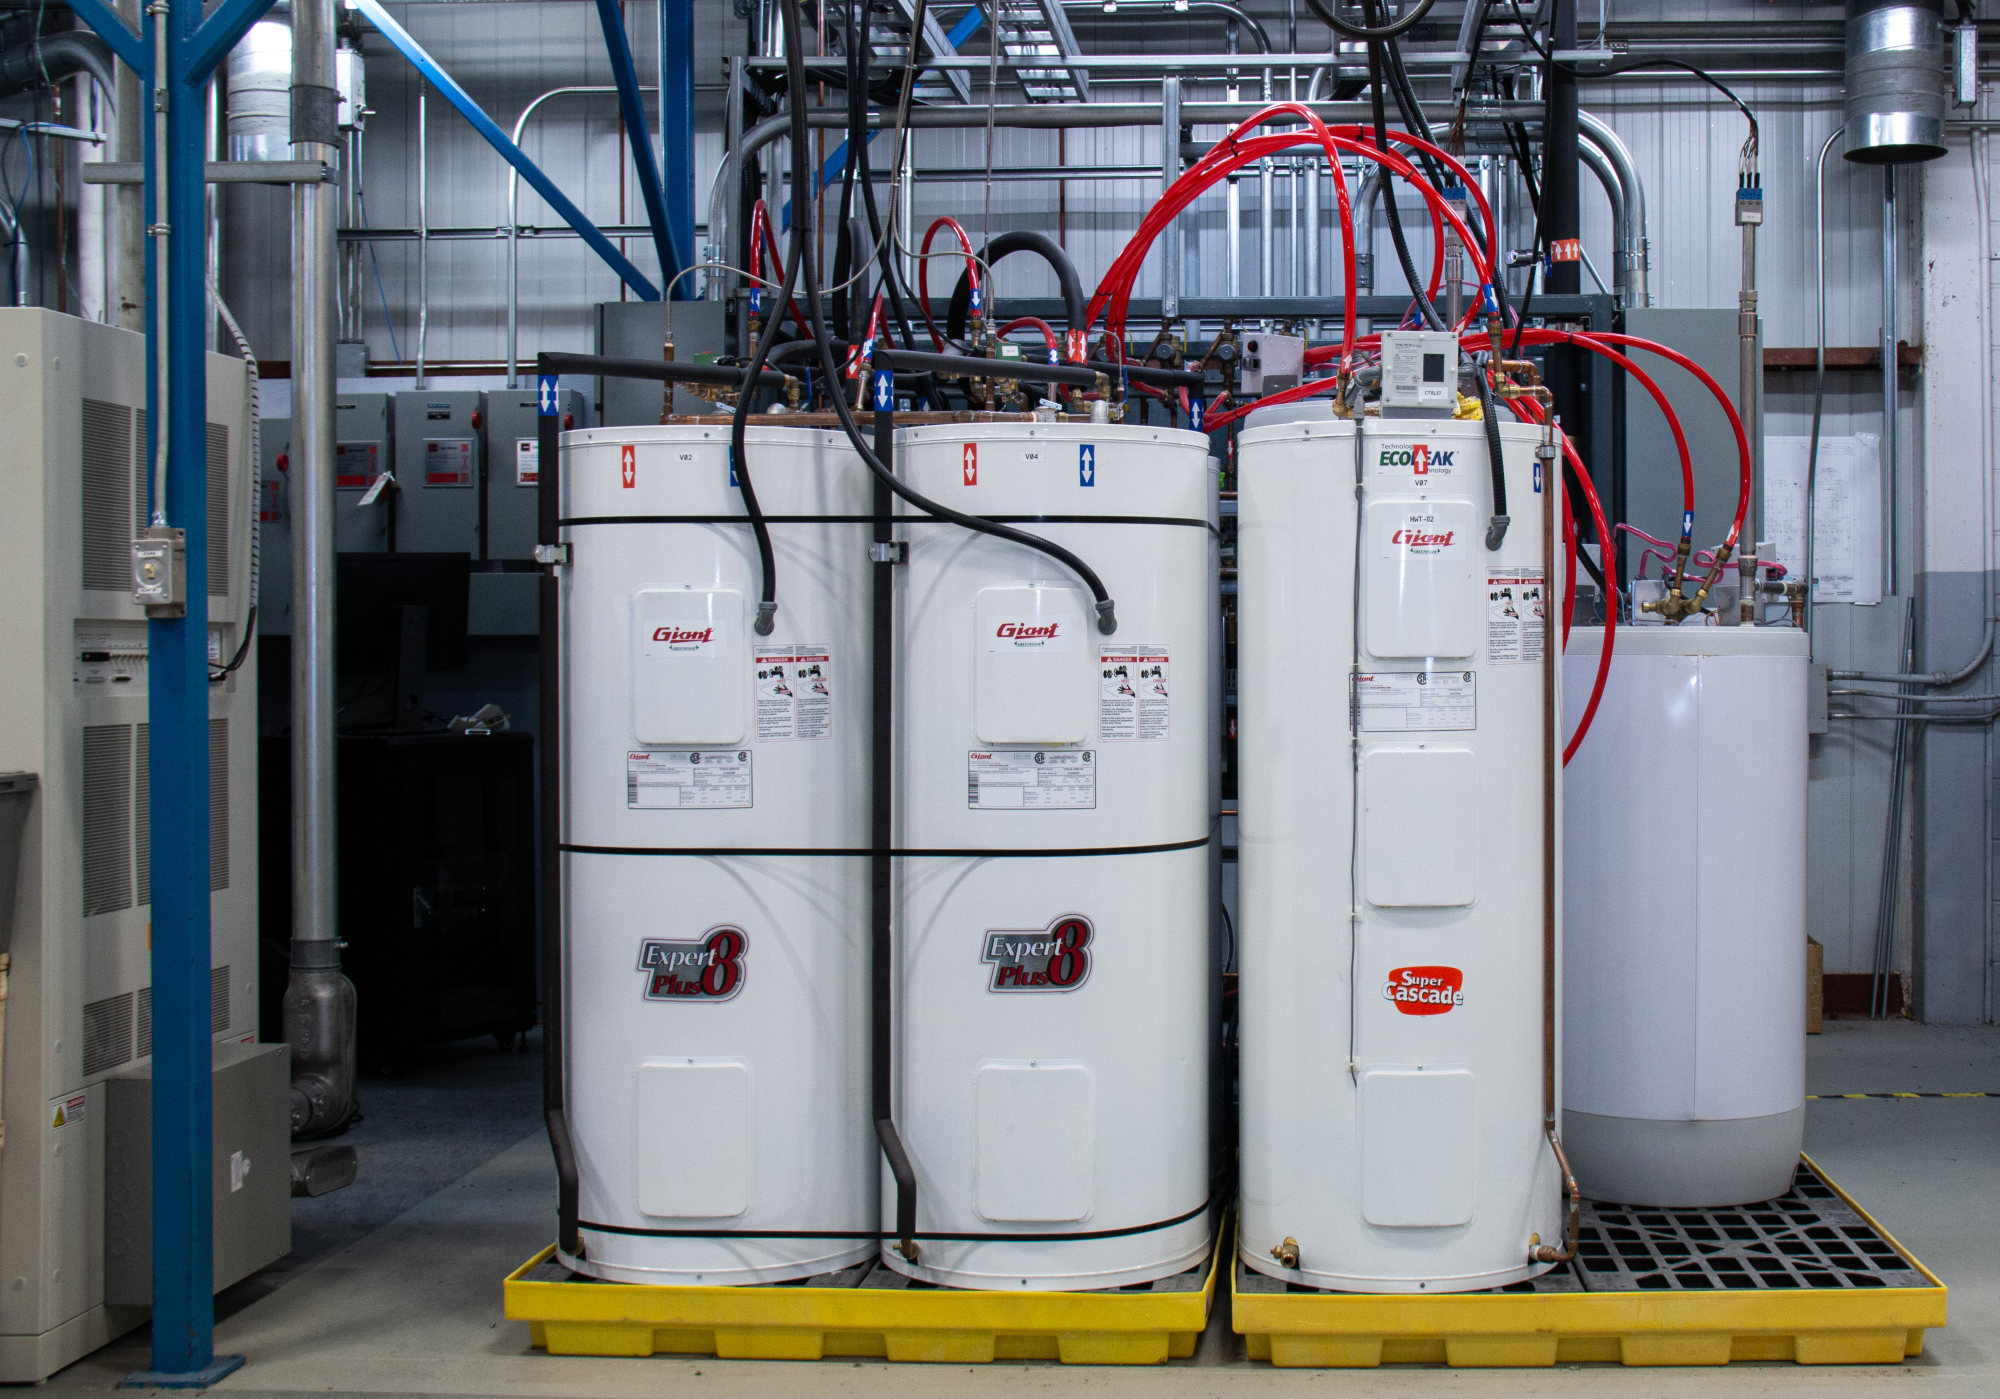 The image shows a view of the electric water heater test bench at CanmetENERGY in Varennes.